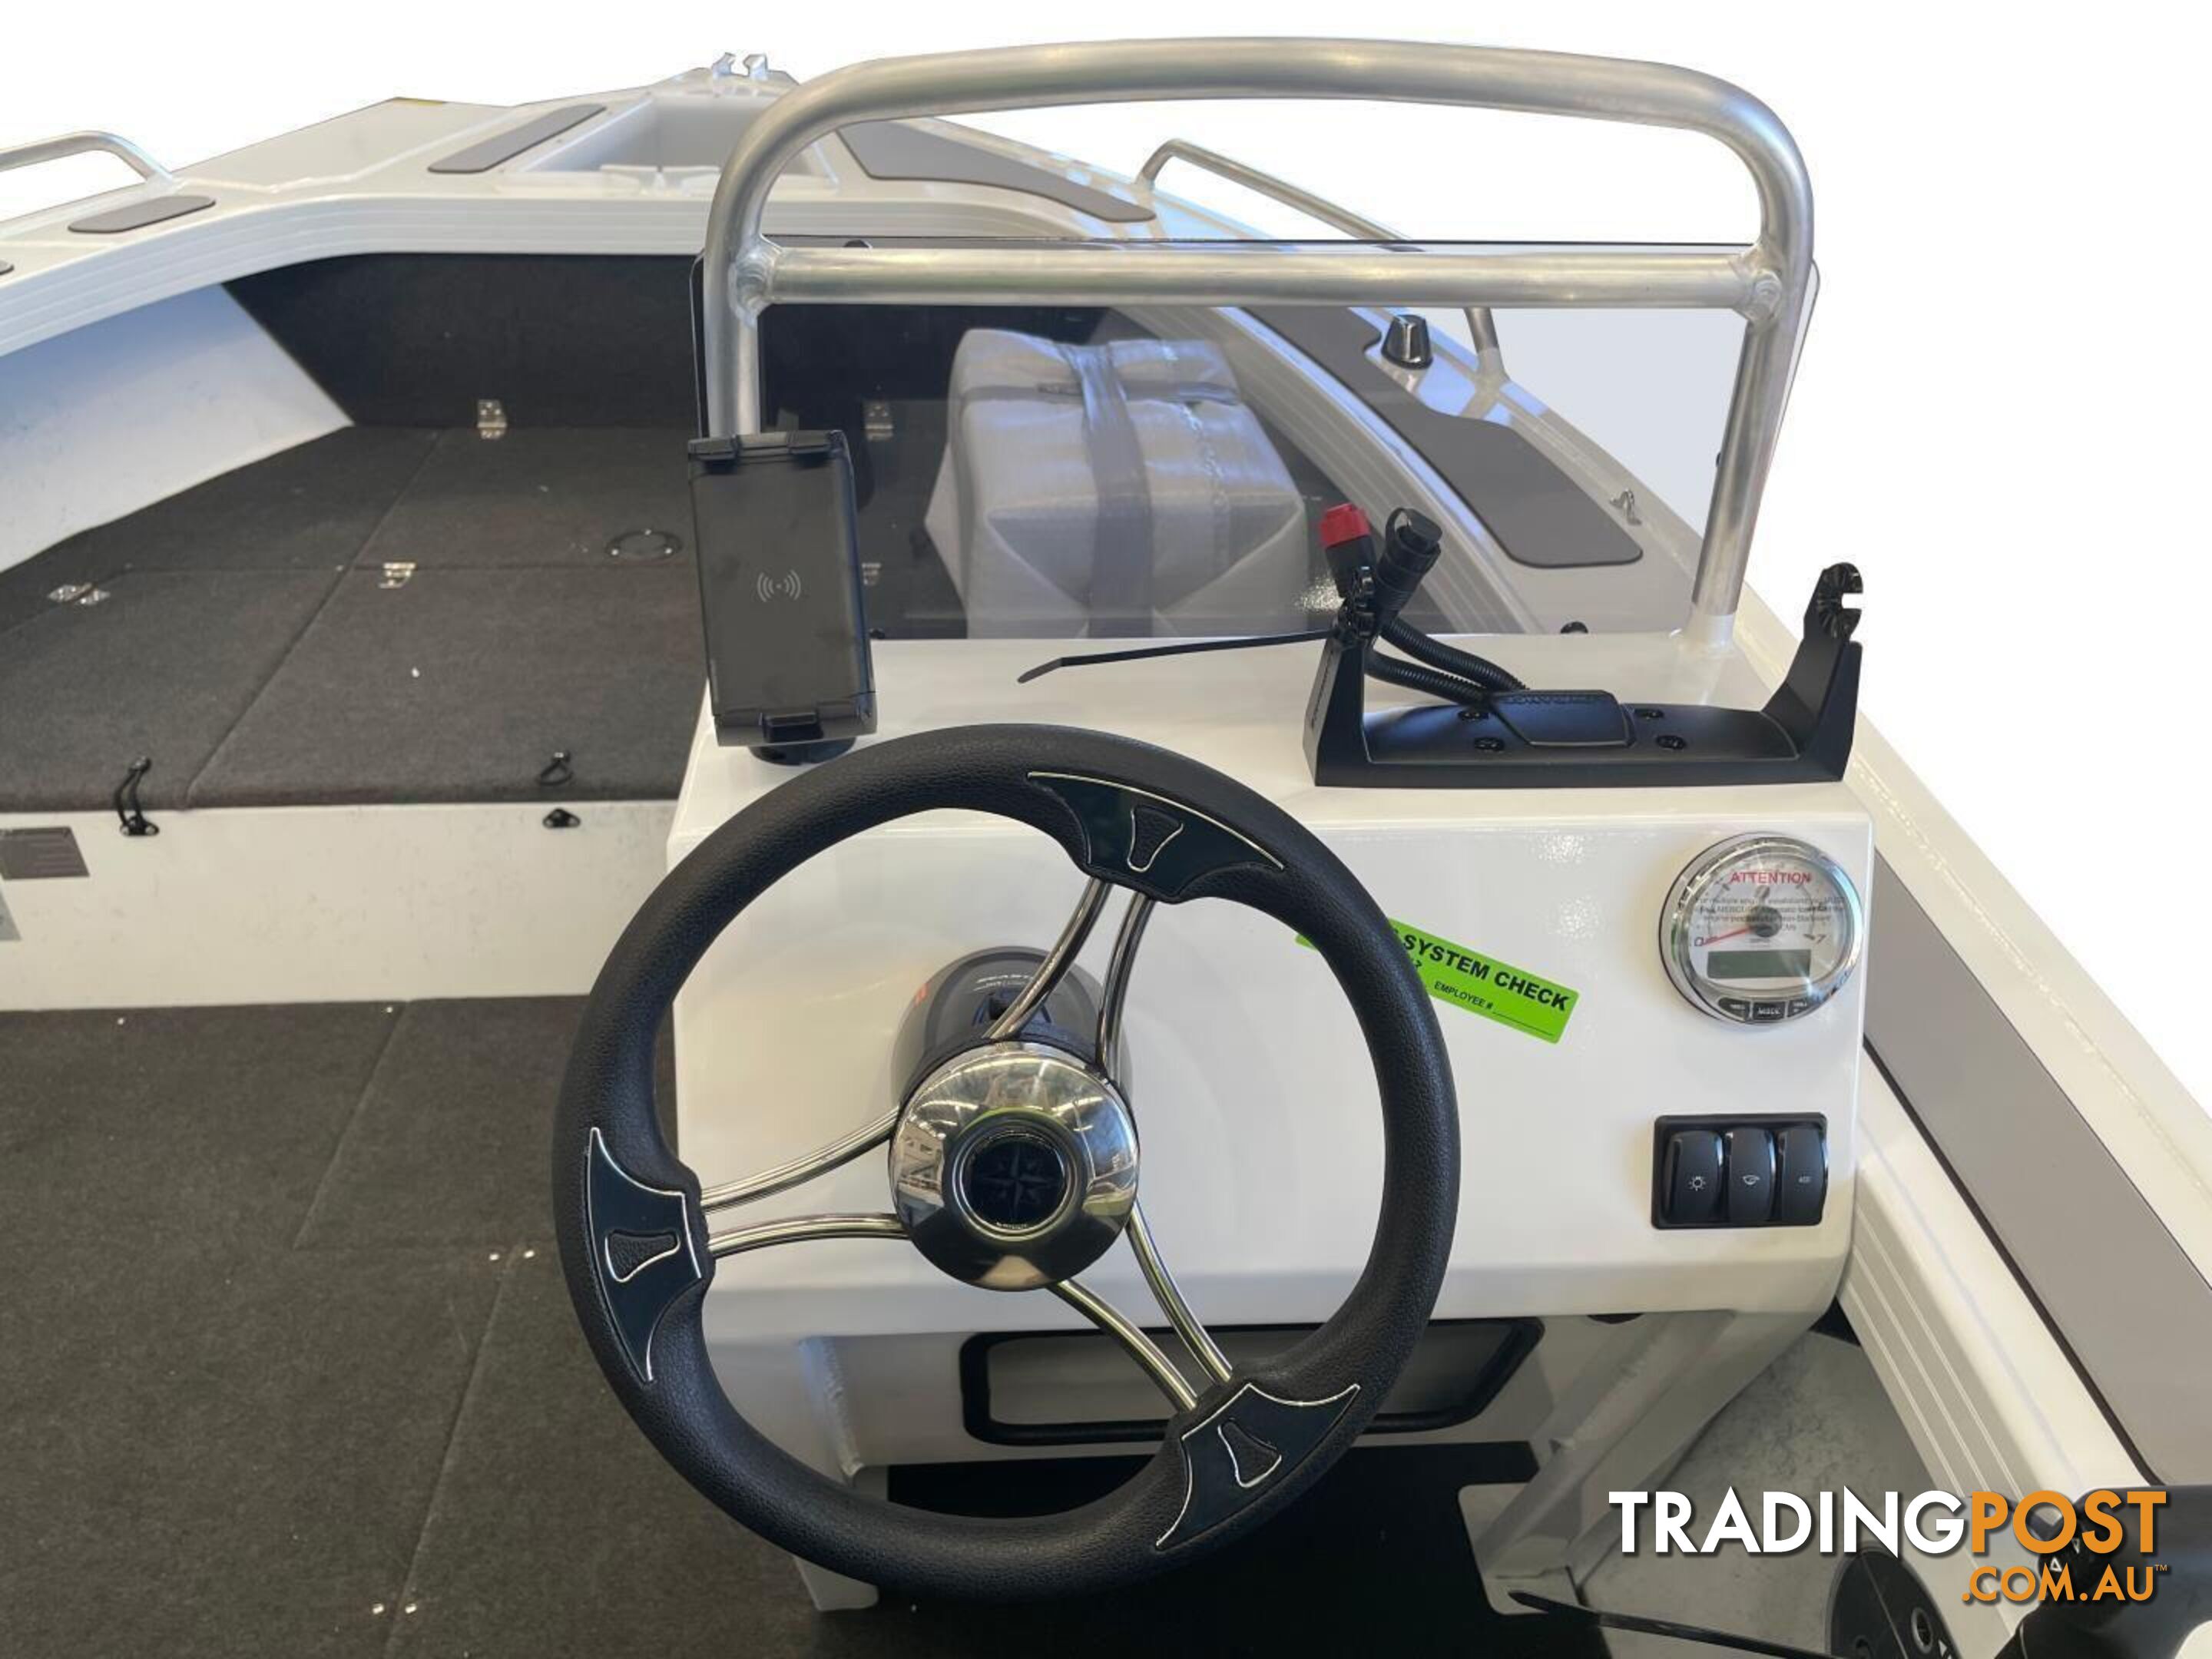 Quintrex 530 Renegade SC(Side Console) + Yamaha F115hp 4-Stroke - Pack 2 for sale online prices